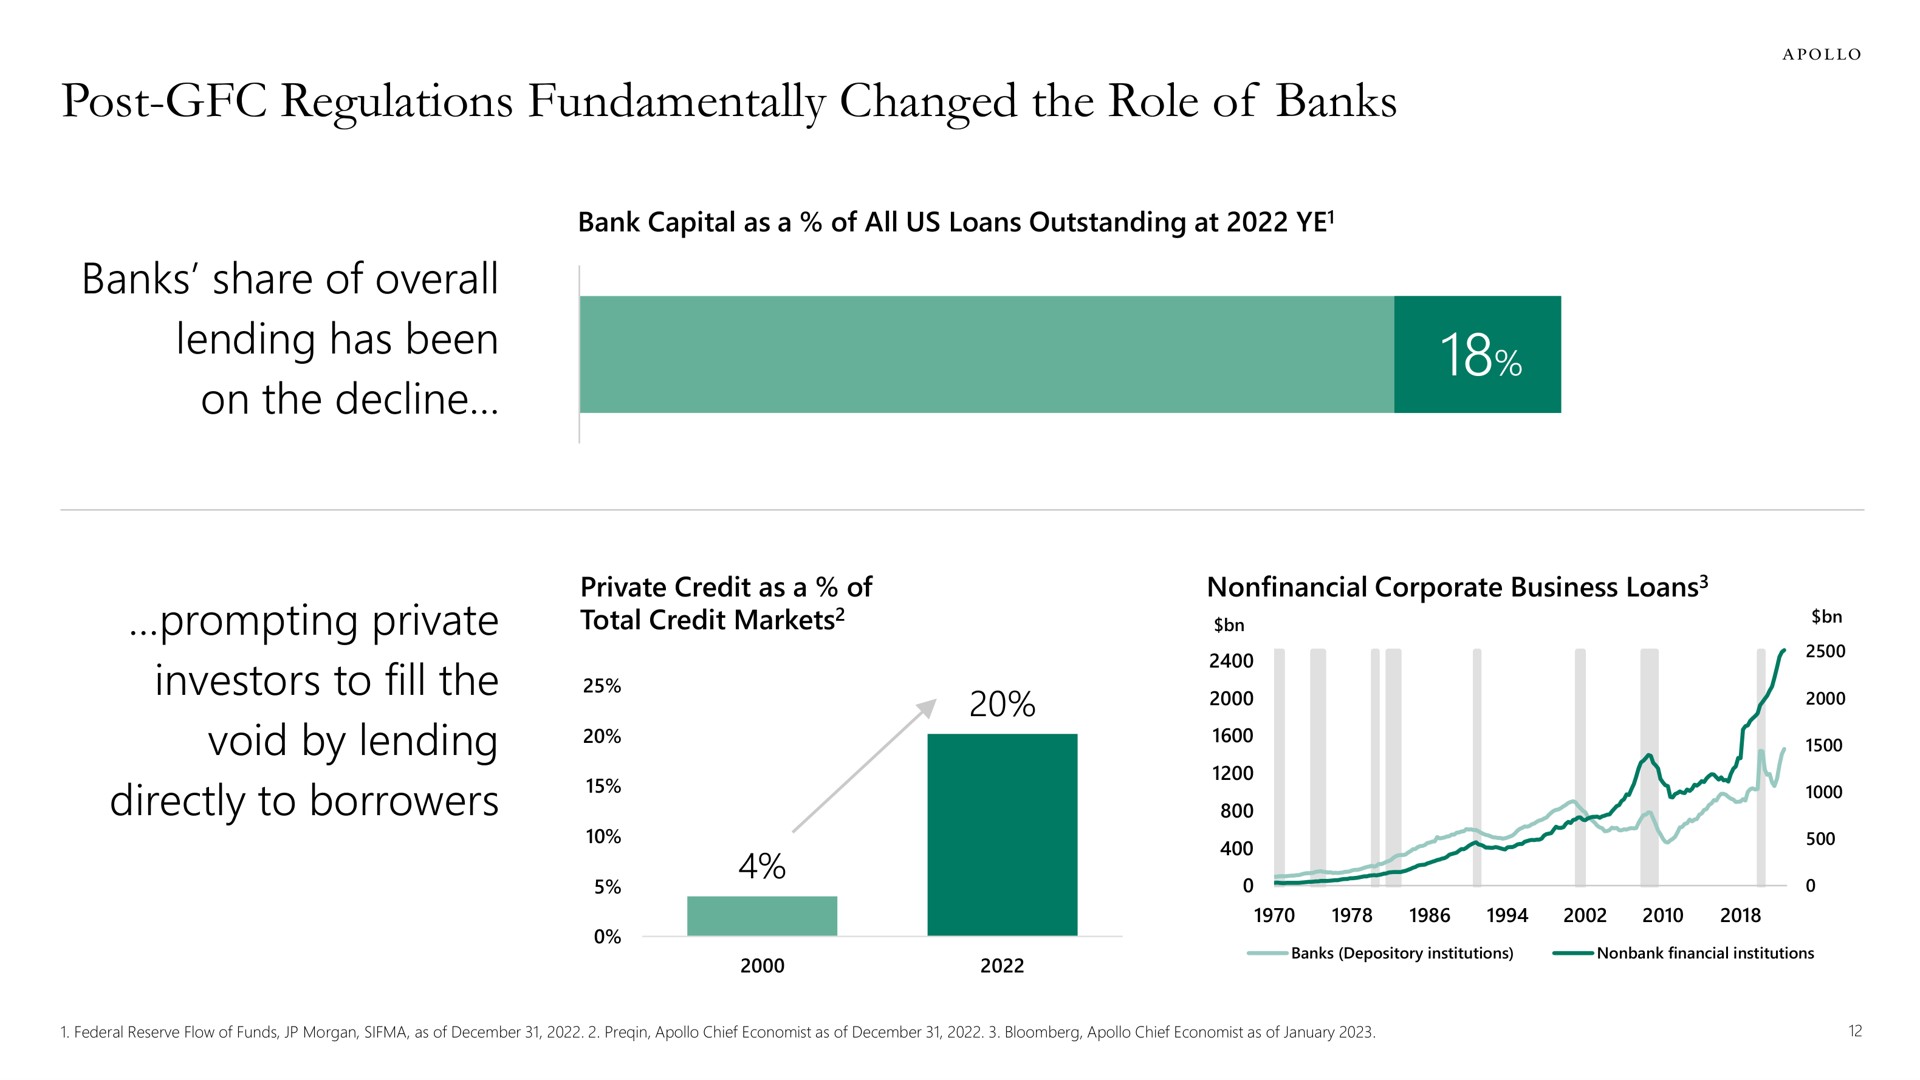 post regulations fundamentally changed the role of banks banks share of overall lending has been on the decline prompting private investors to fill the void by lending directly to borrowers | Apollo Global Management